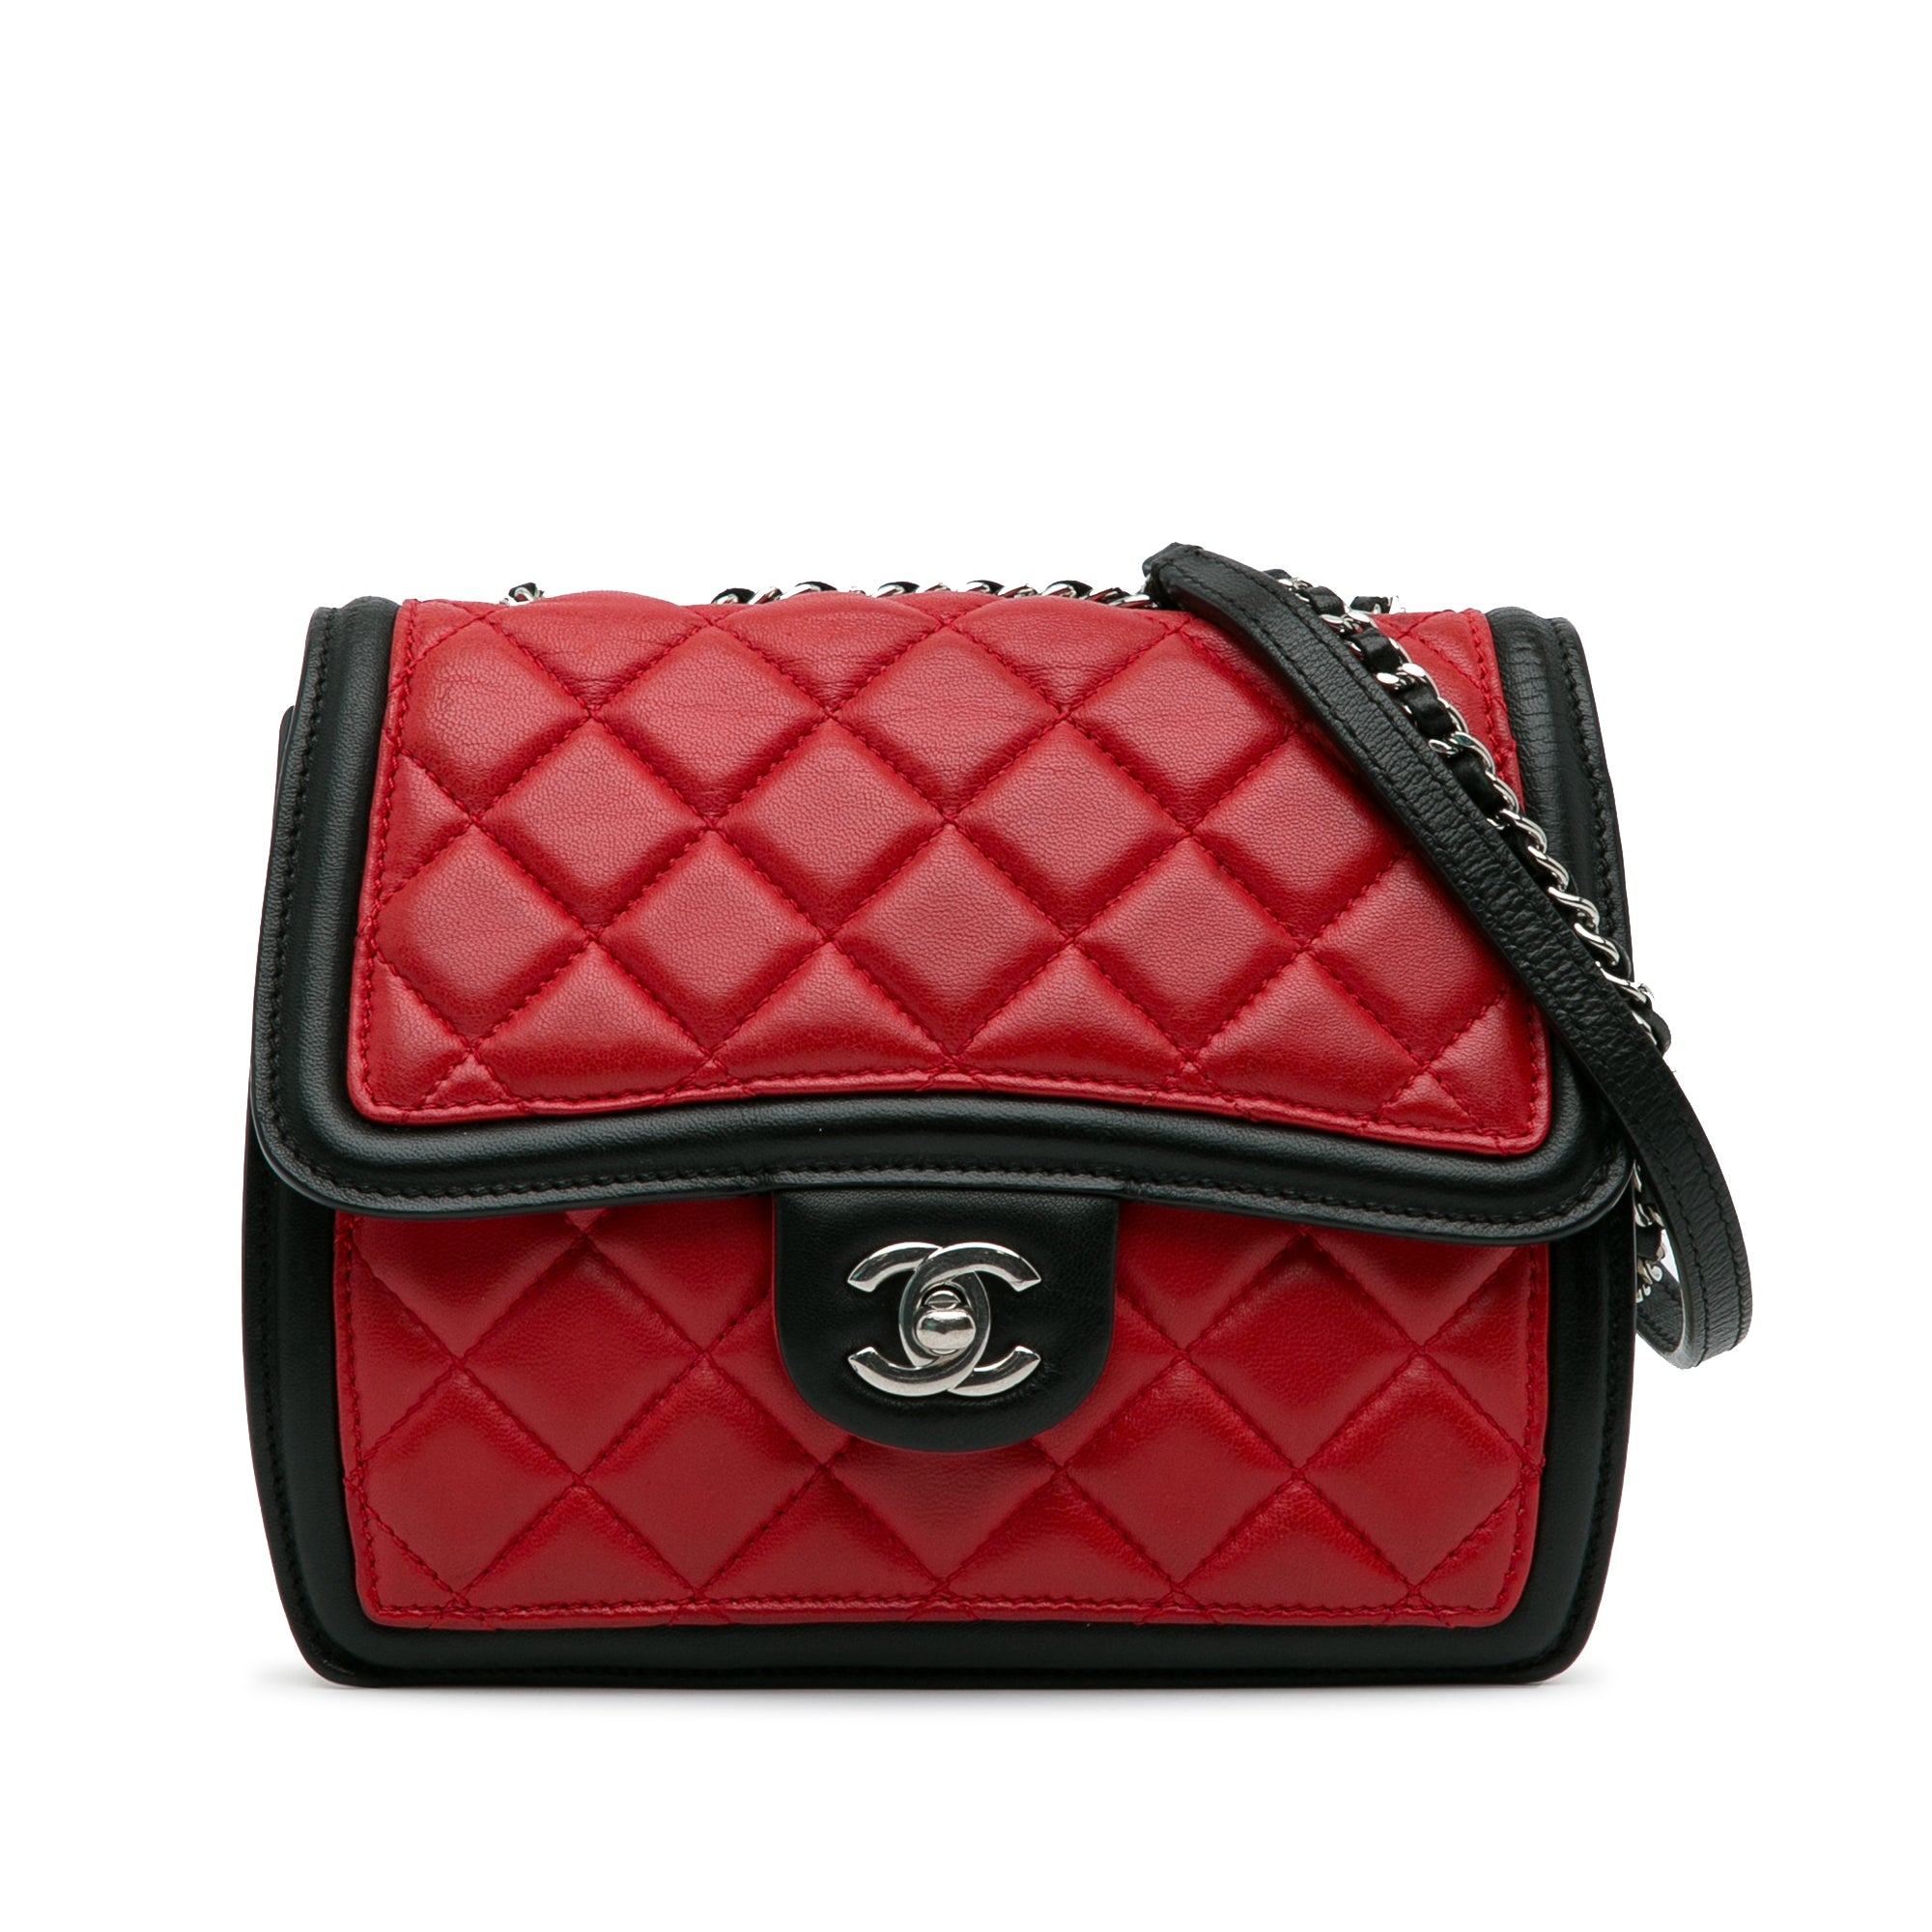 Chanel Red Quilted Lambskin Leather Classic Rectangular New Mini Flap Bag -  Yoogi's Closet